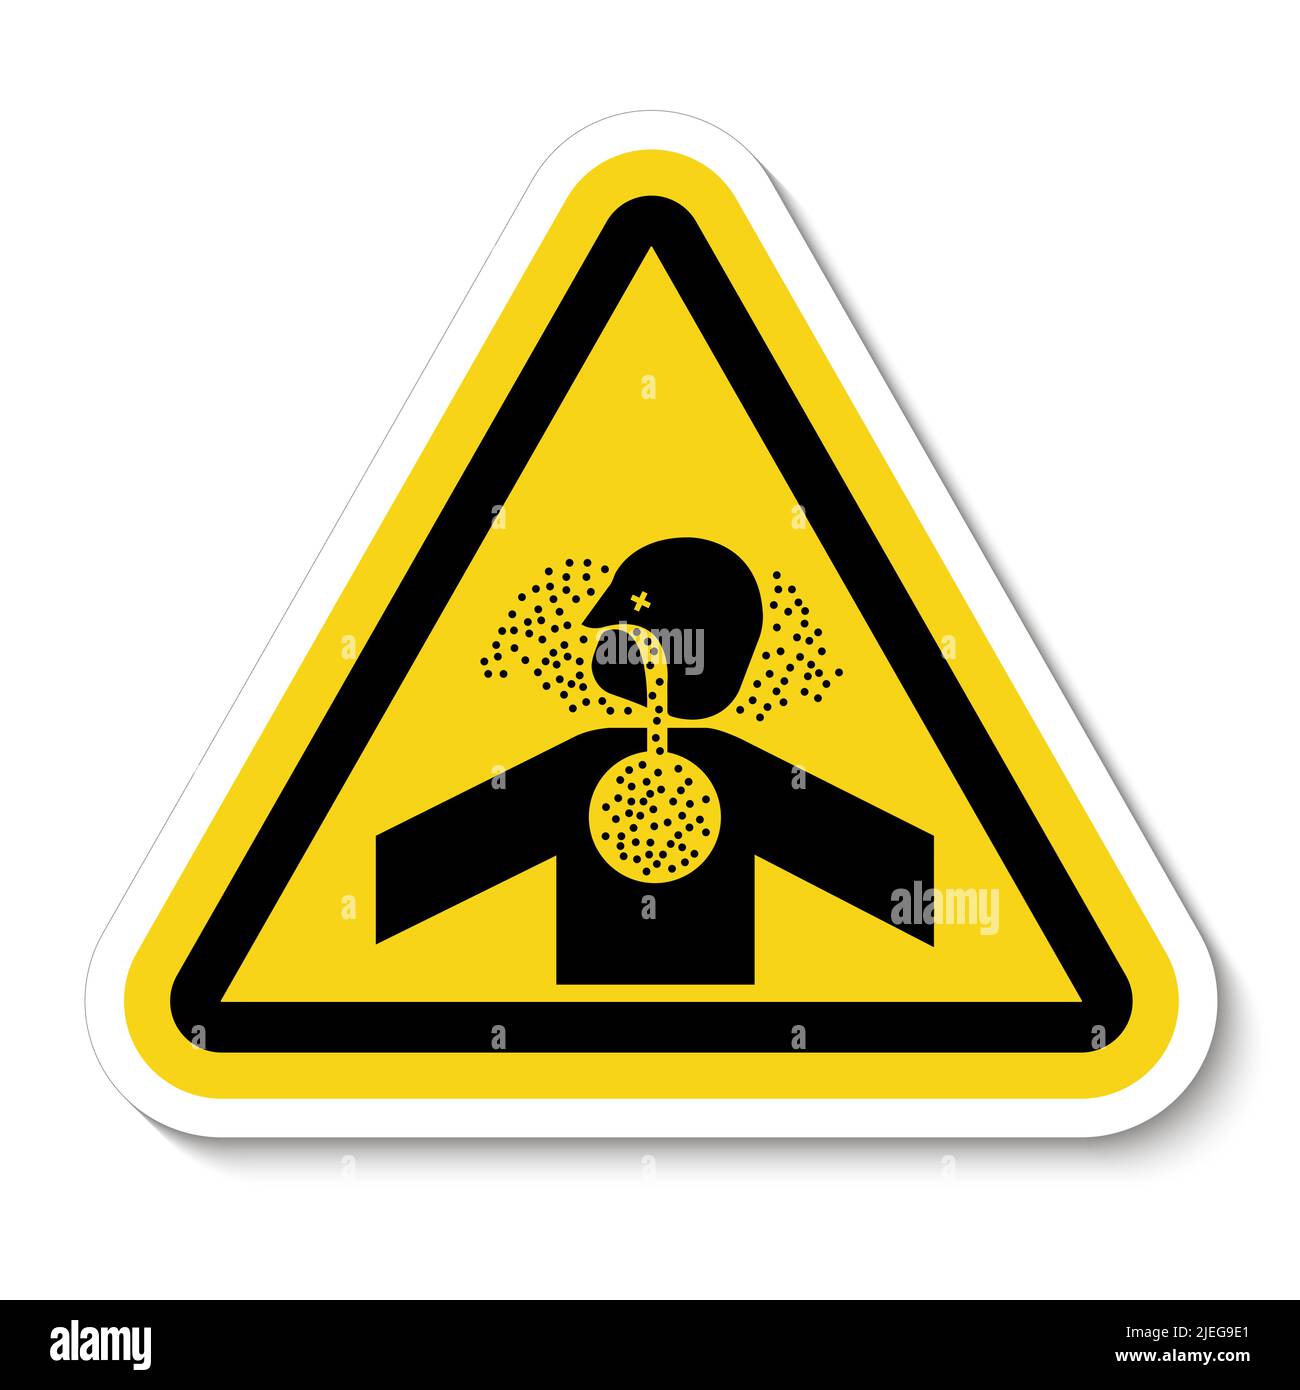 Toxic Gases Asphyxiation Symbol Sign Isolate on White Background,Vector Illustration Stock Vector